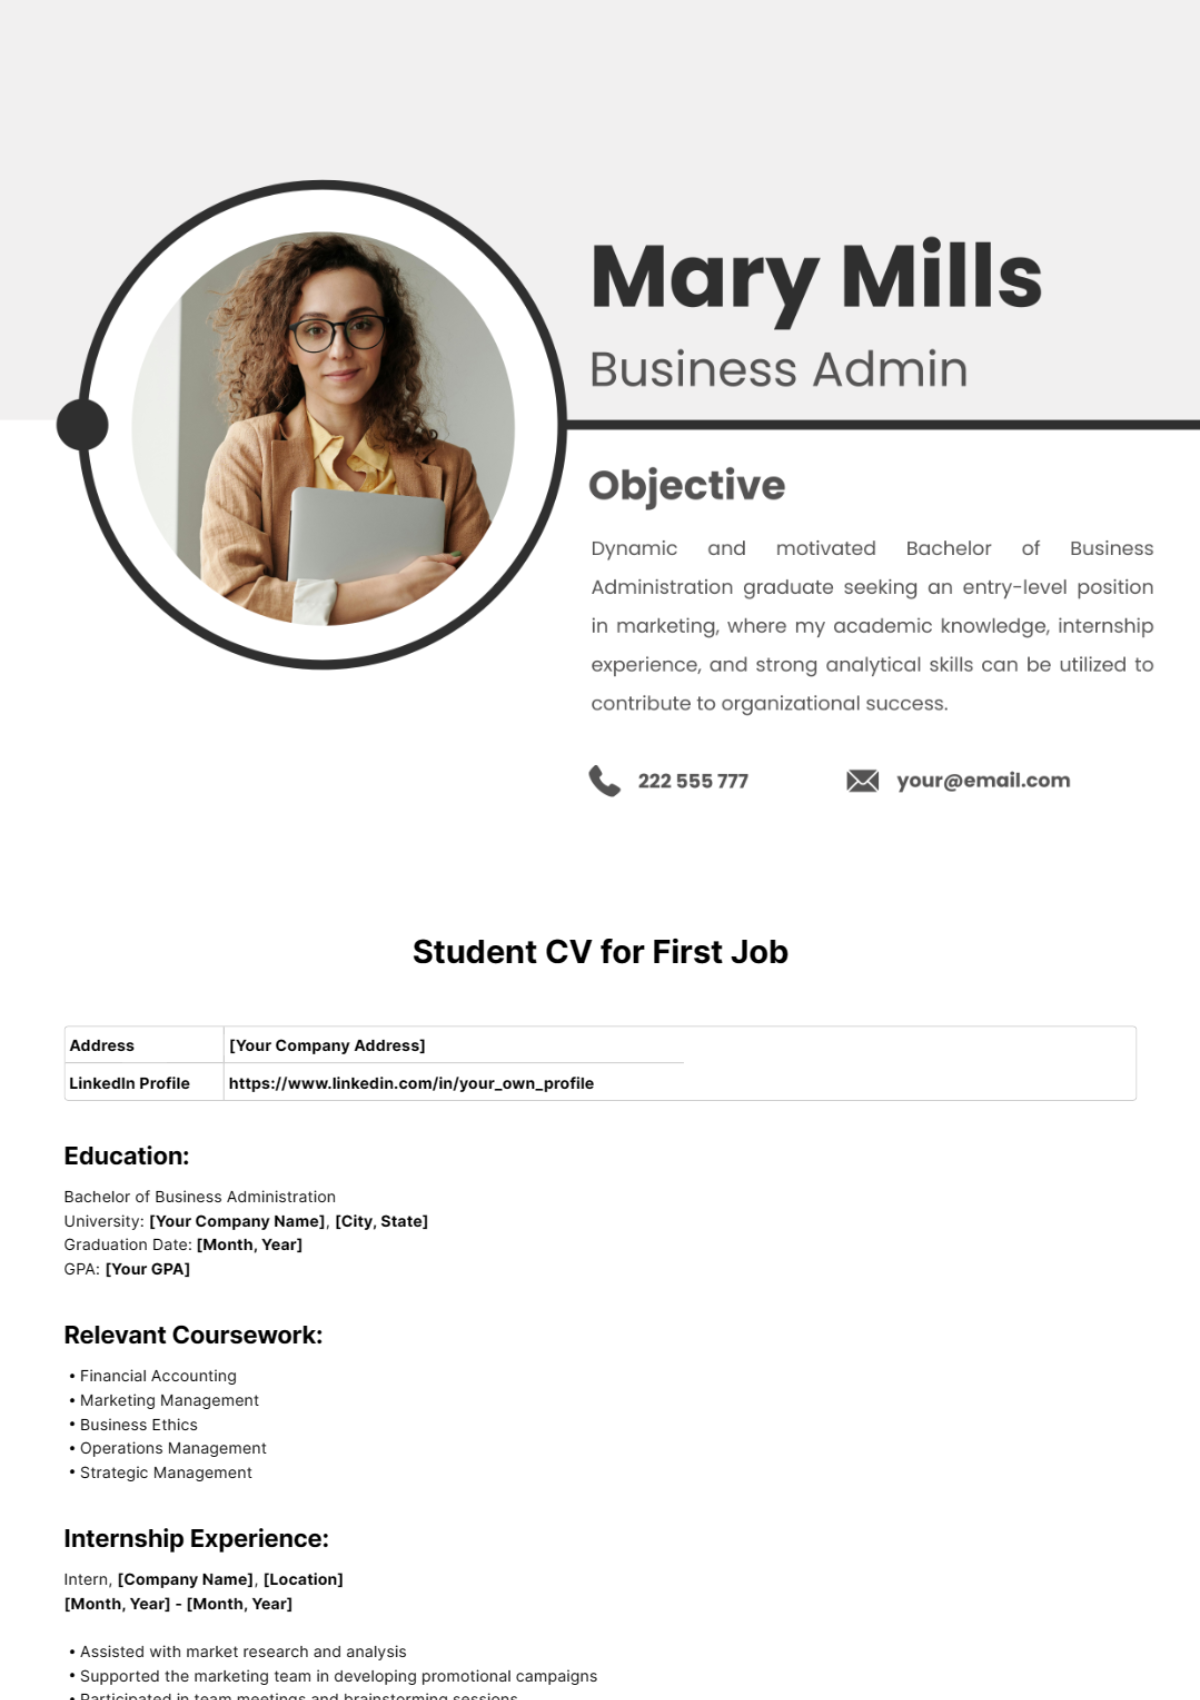 Free Student CV for First Job Template